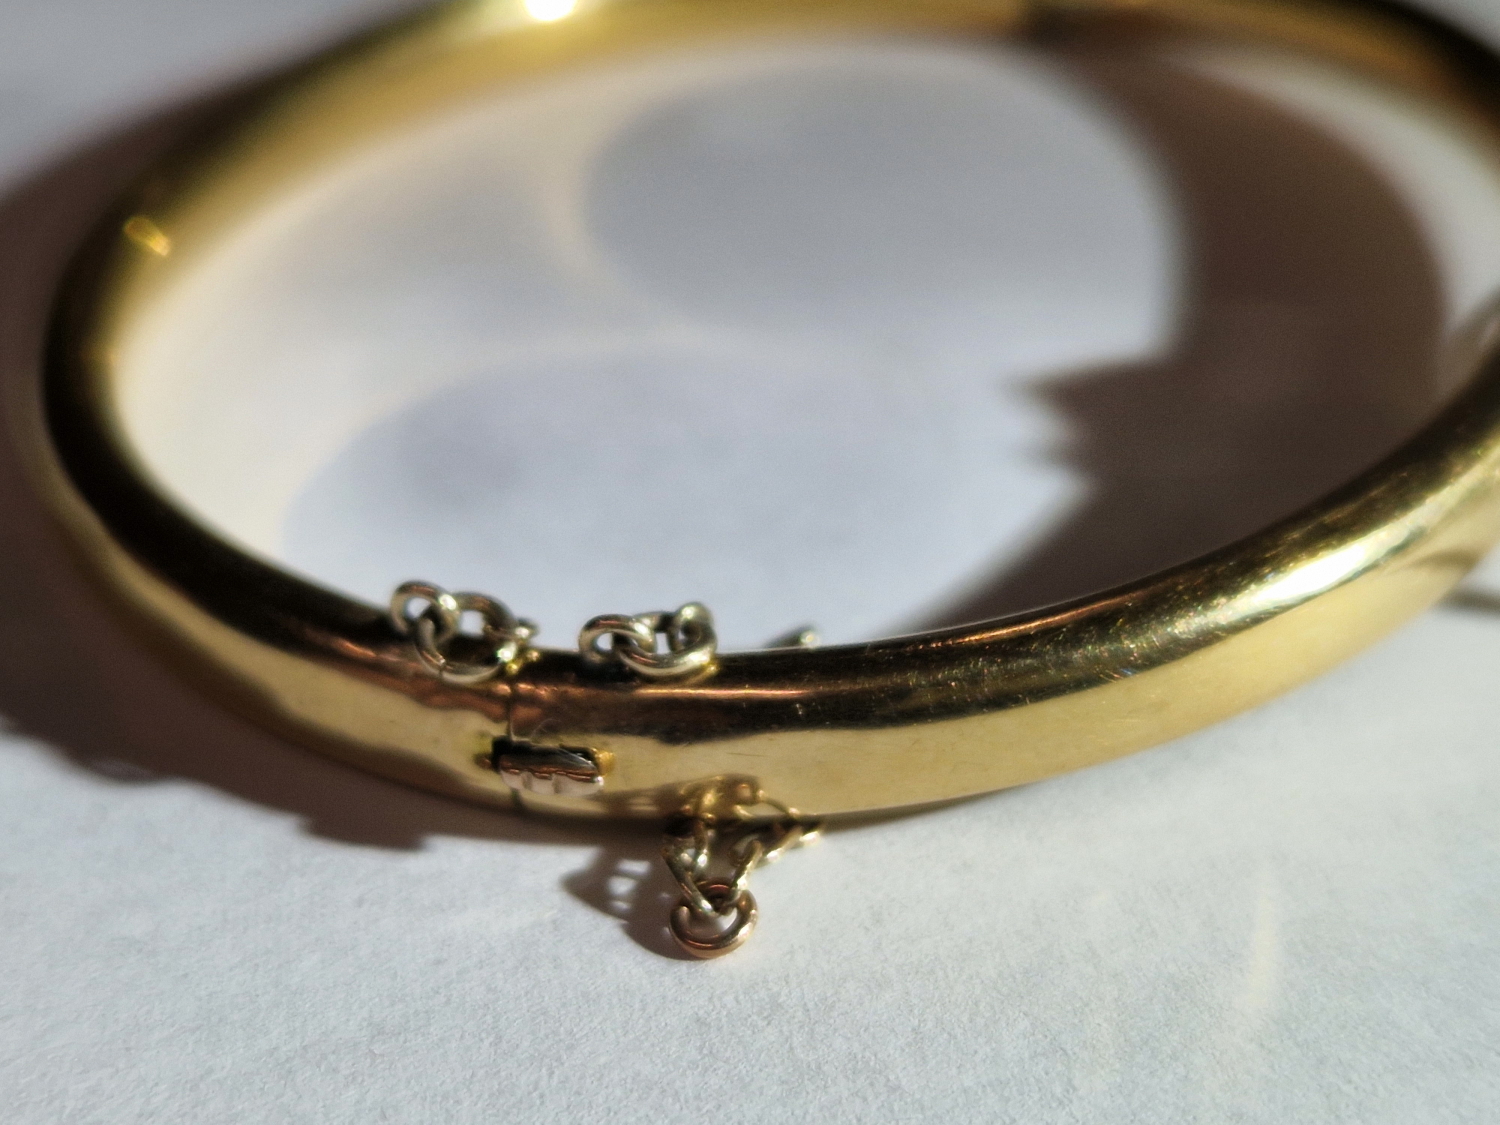 AN ANTIQUE BANGLE SET WITH A RUBY AND DIAMOND HORSESHOE. THE HINGED BANGLE UNHALLMARKED, ASSESSED AS - Image 7 of 8